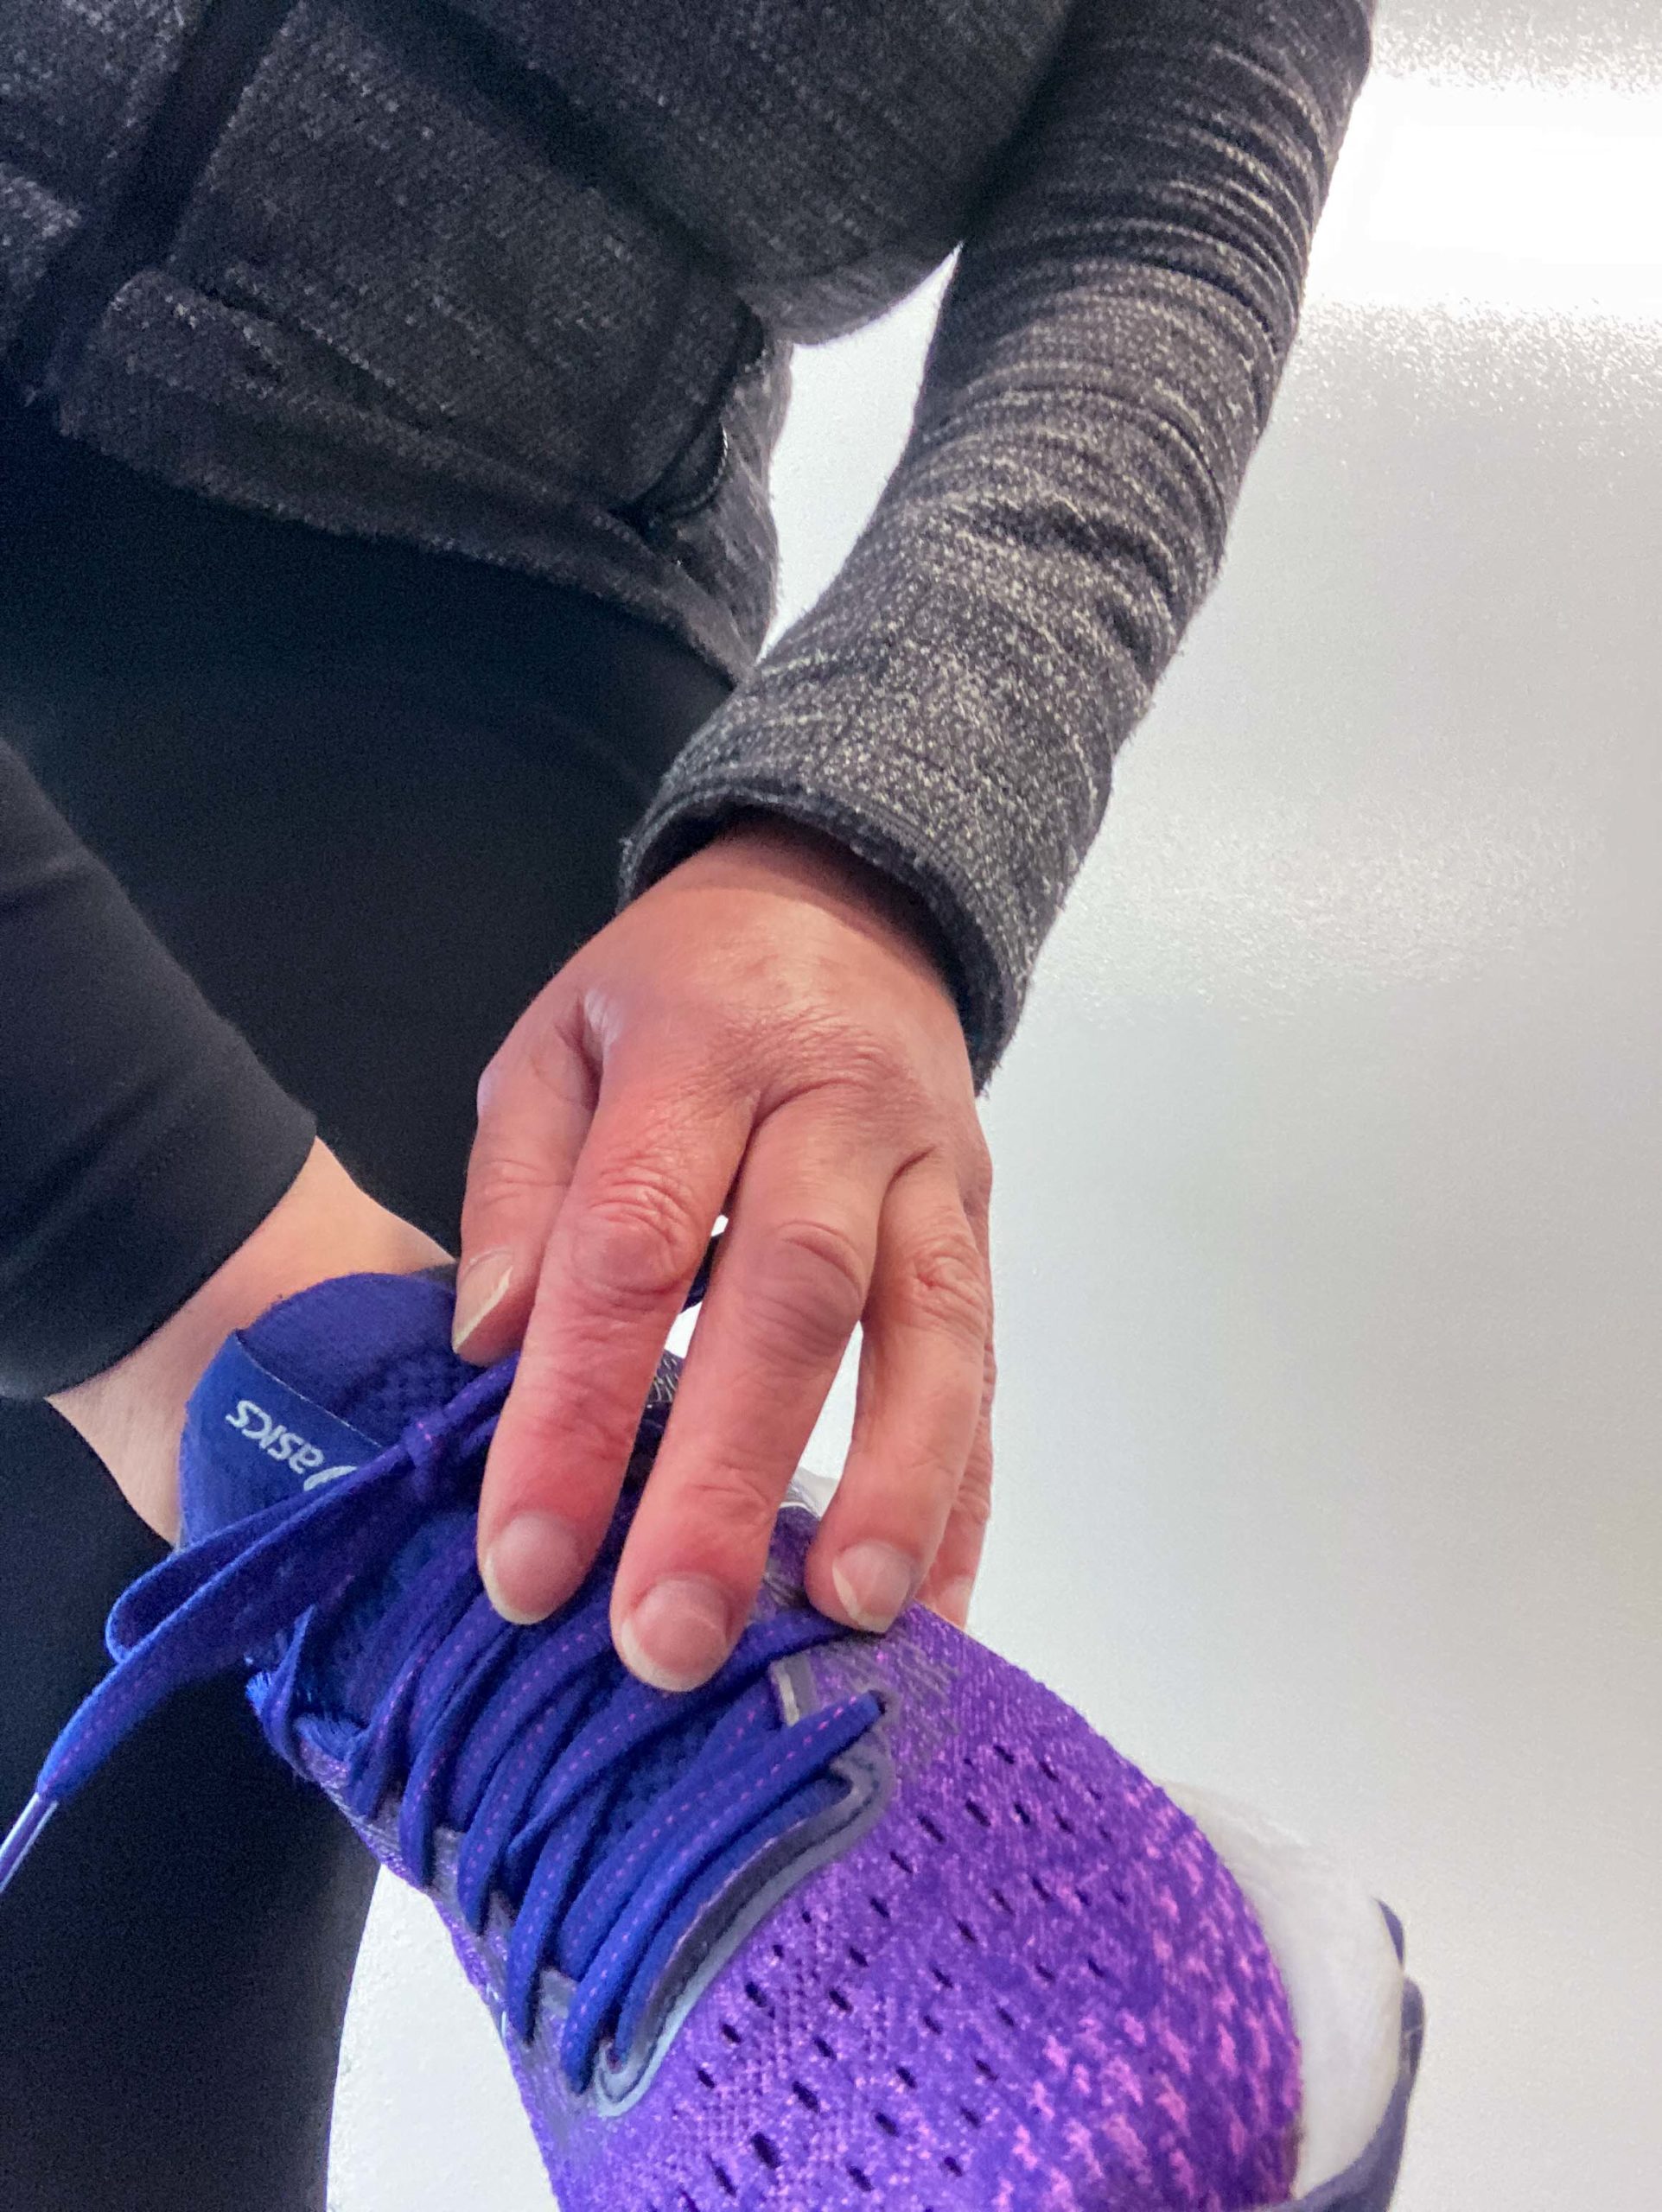 A foot in a purple running shoe being held off the ground with a hand on the shoelace